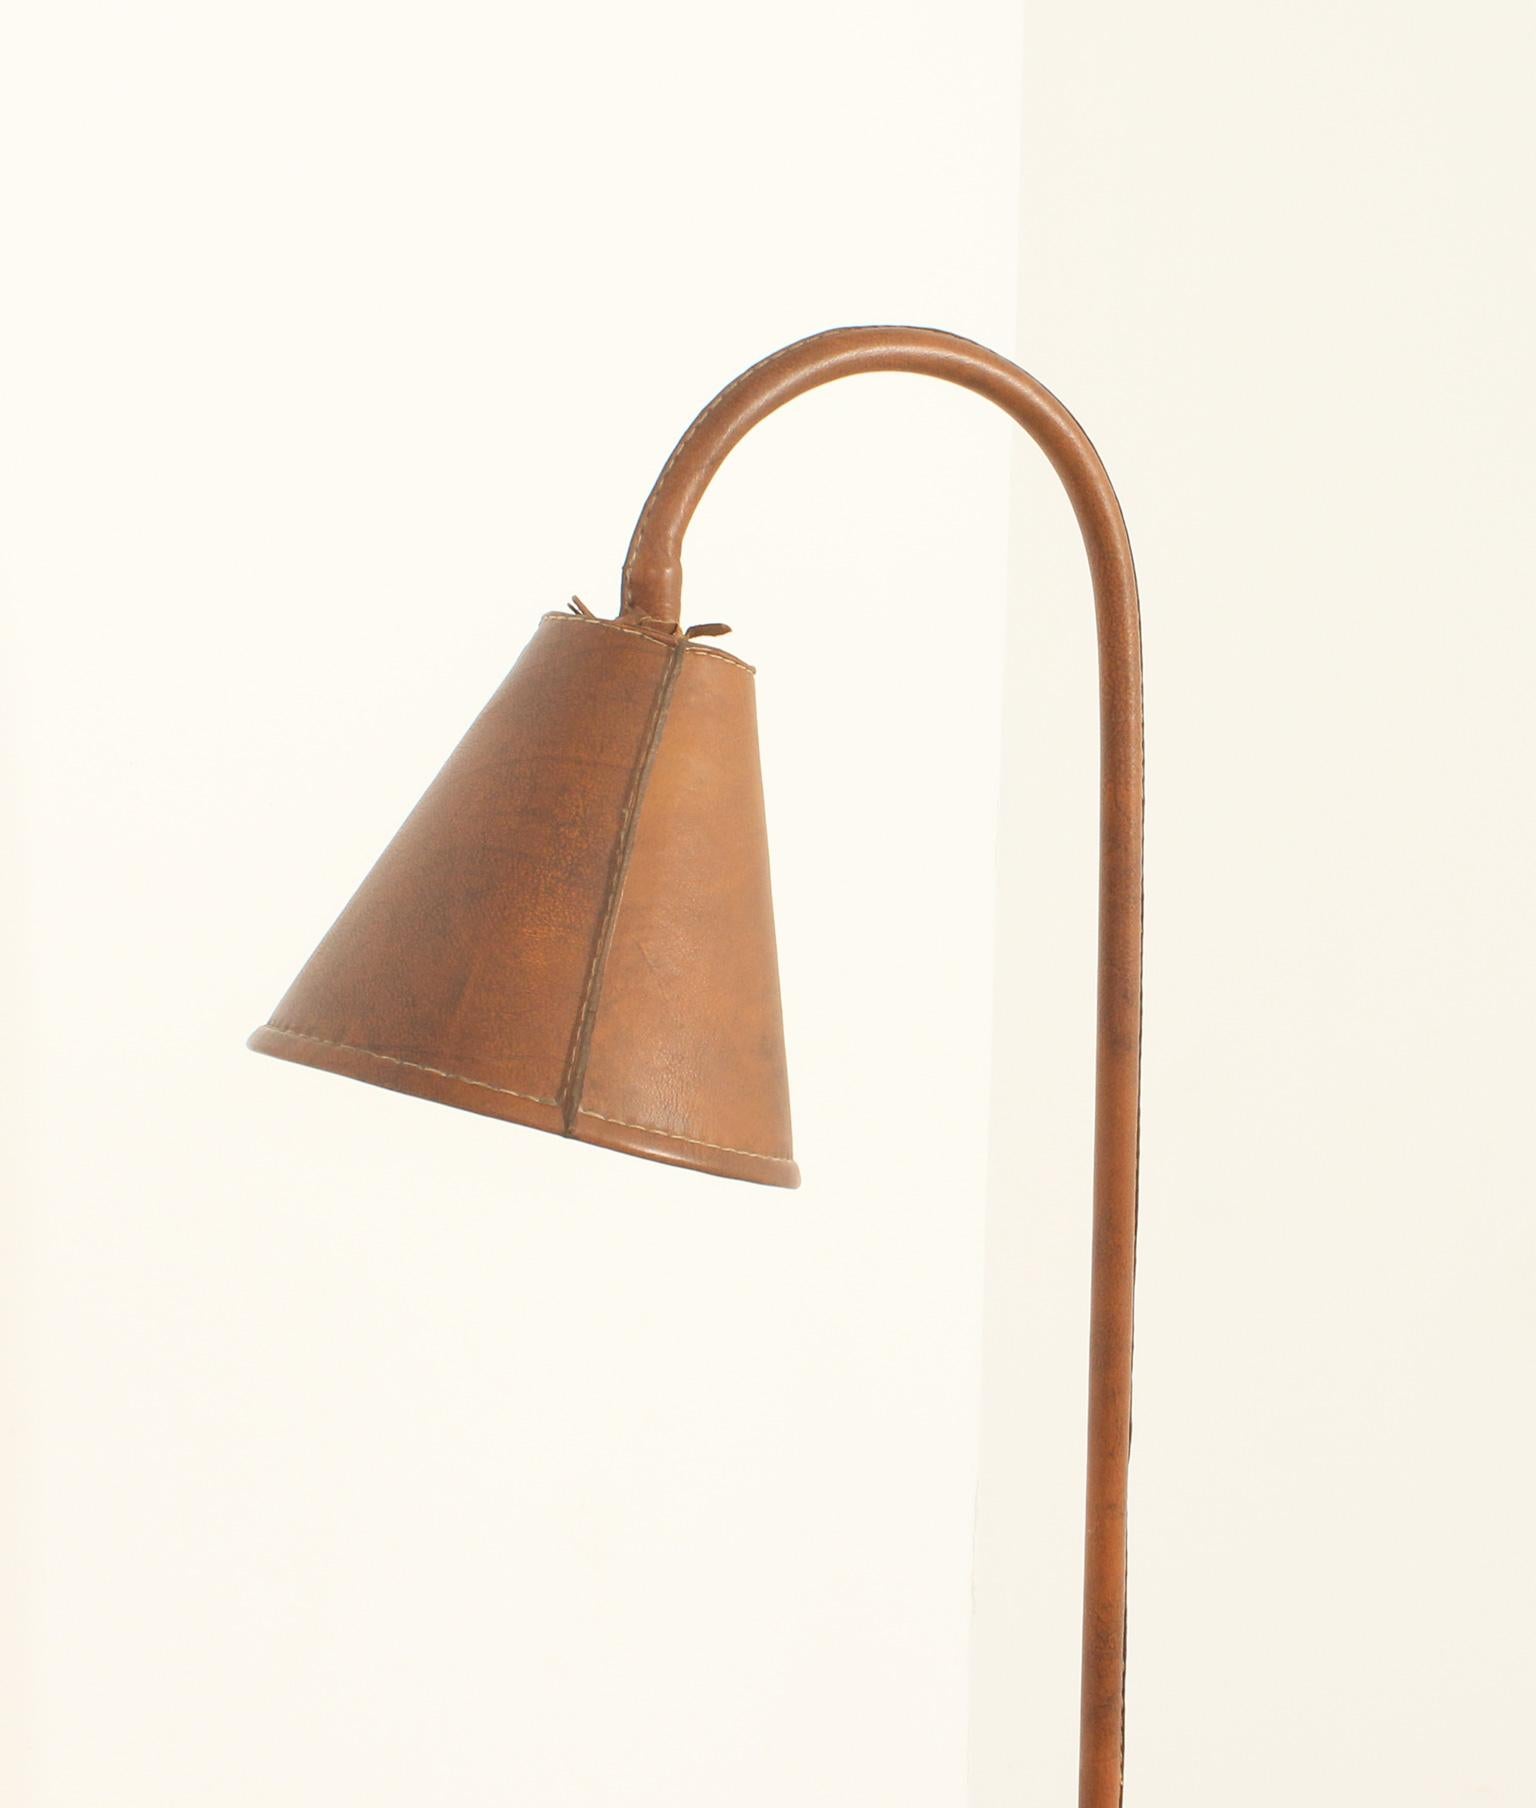 Floor Lamp by Valenti in Brown Leather, Spain, 1950's For Sale 1